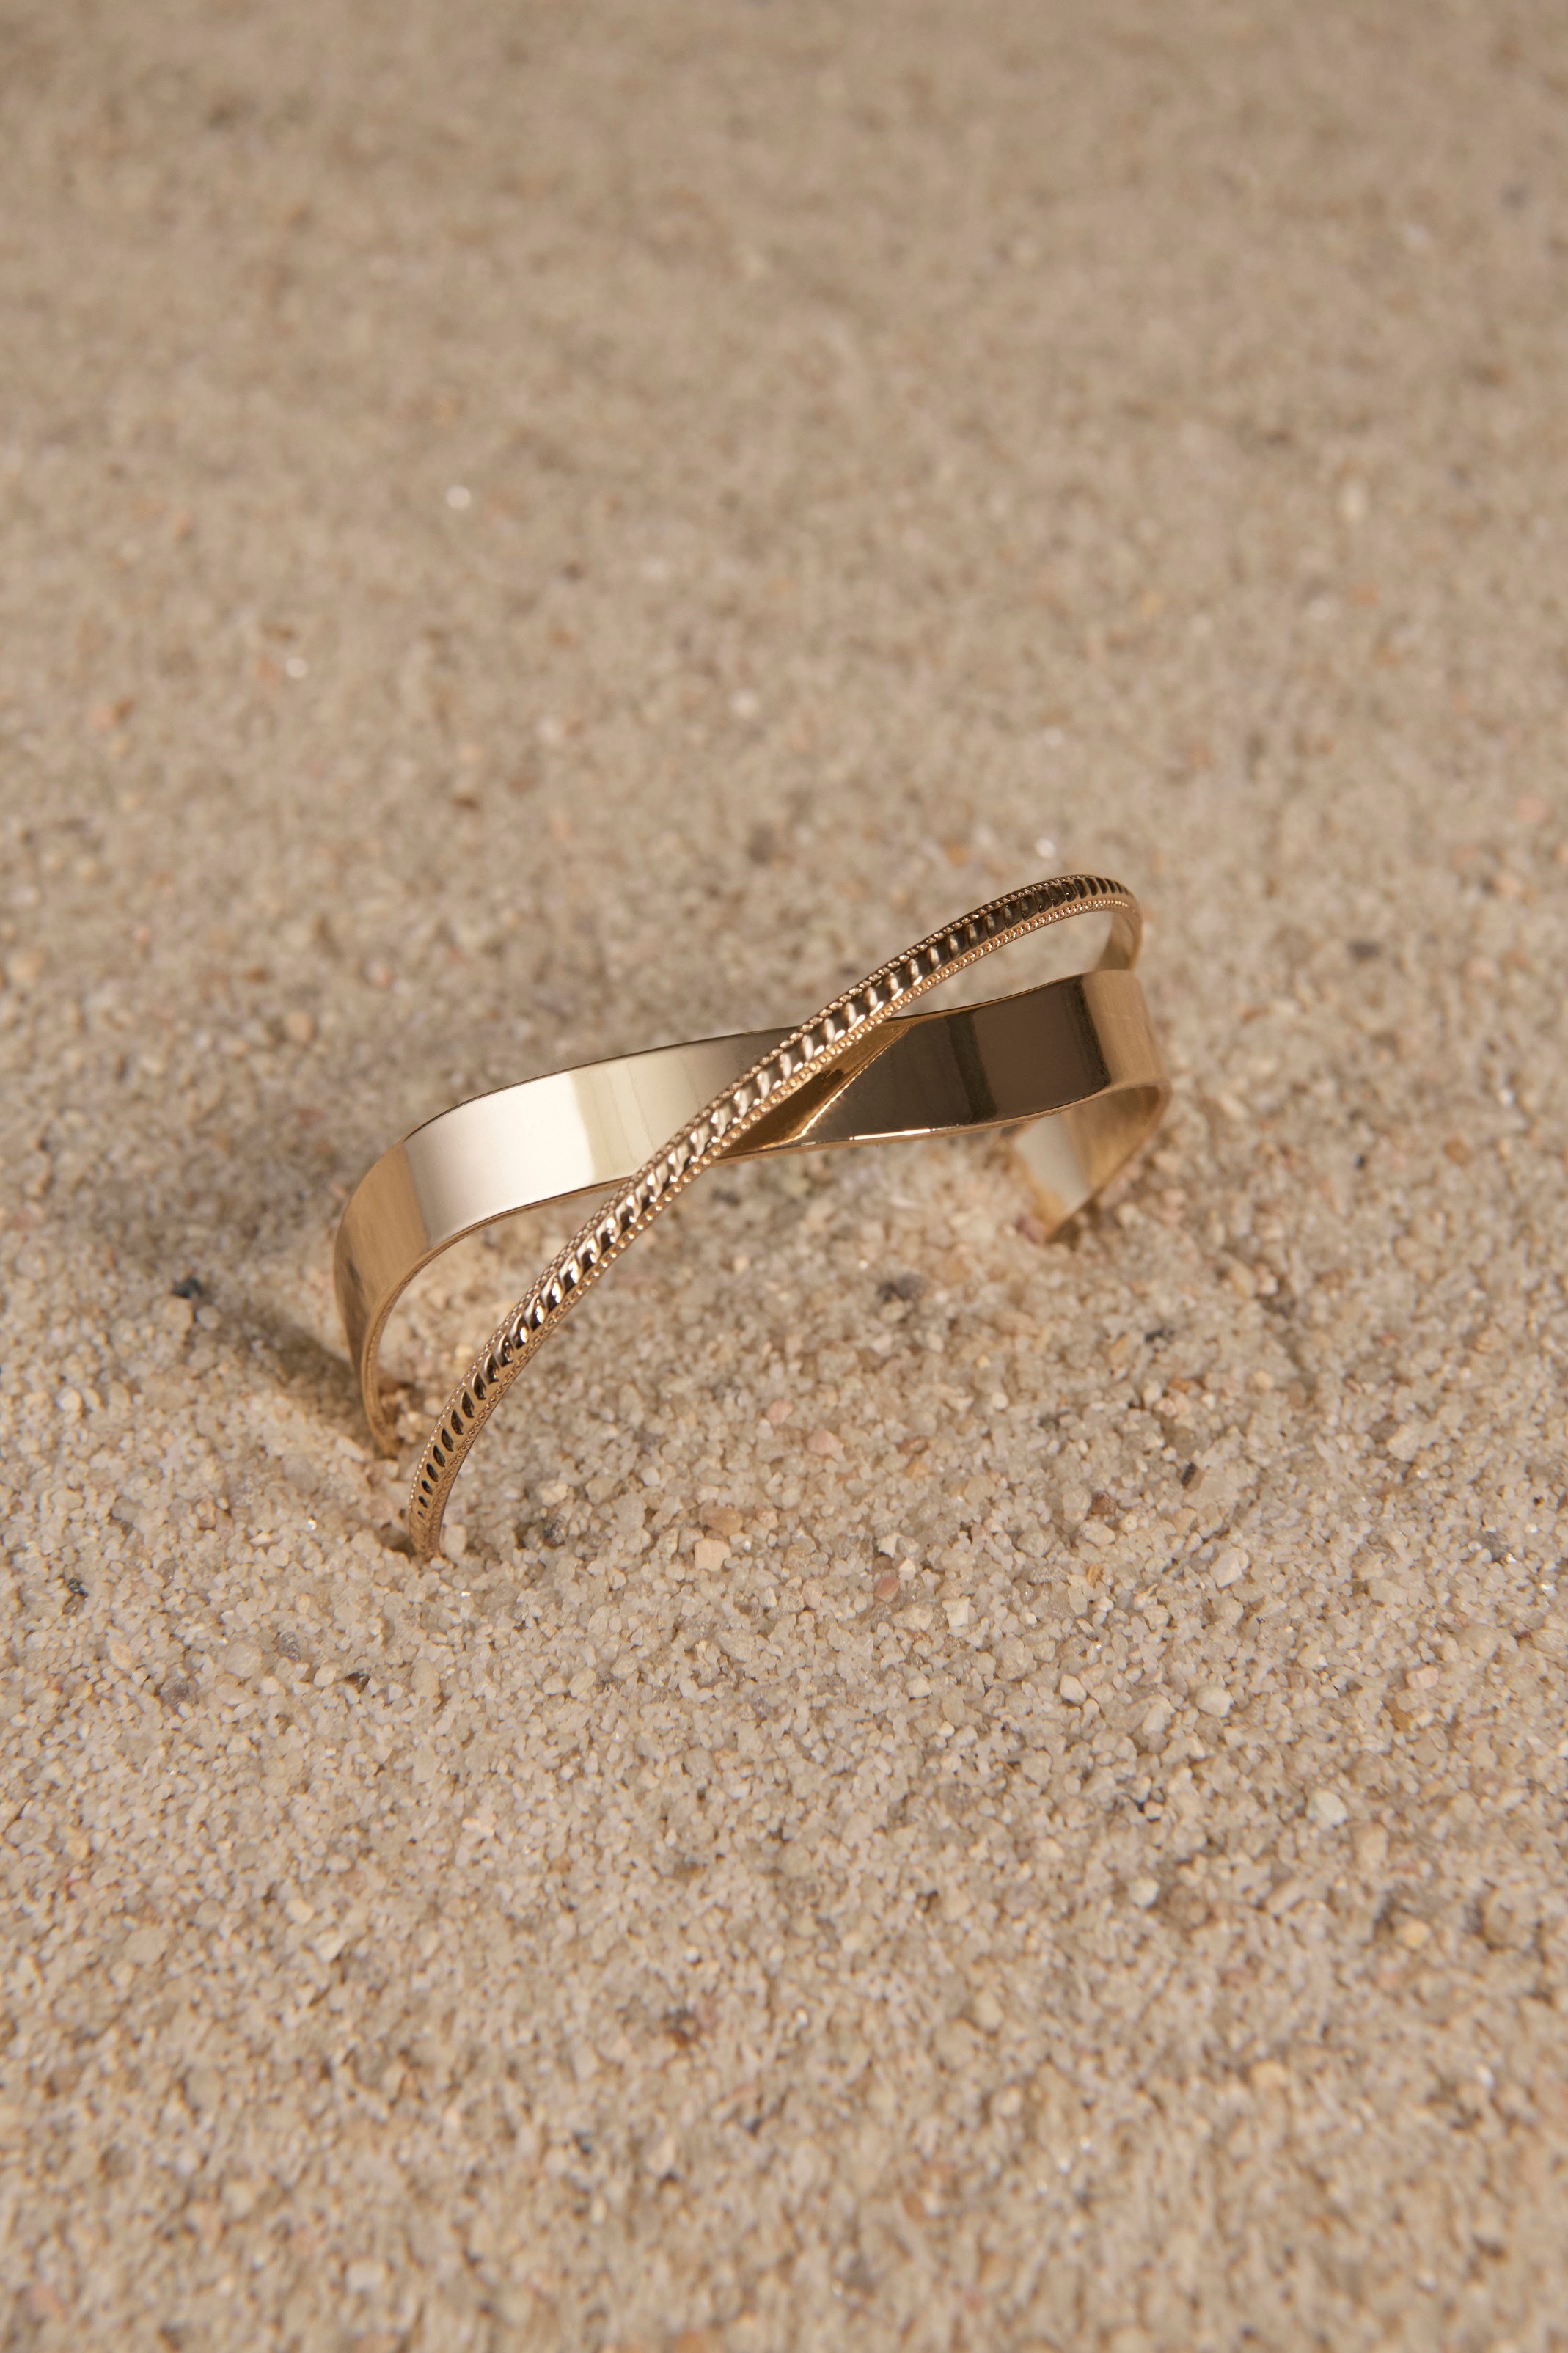 A gold bangle with crossed dual bands sits on a sandy background